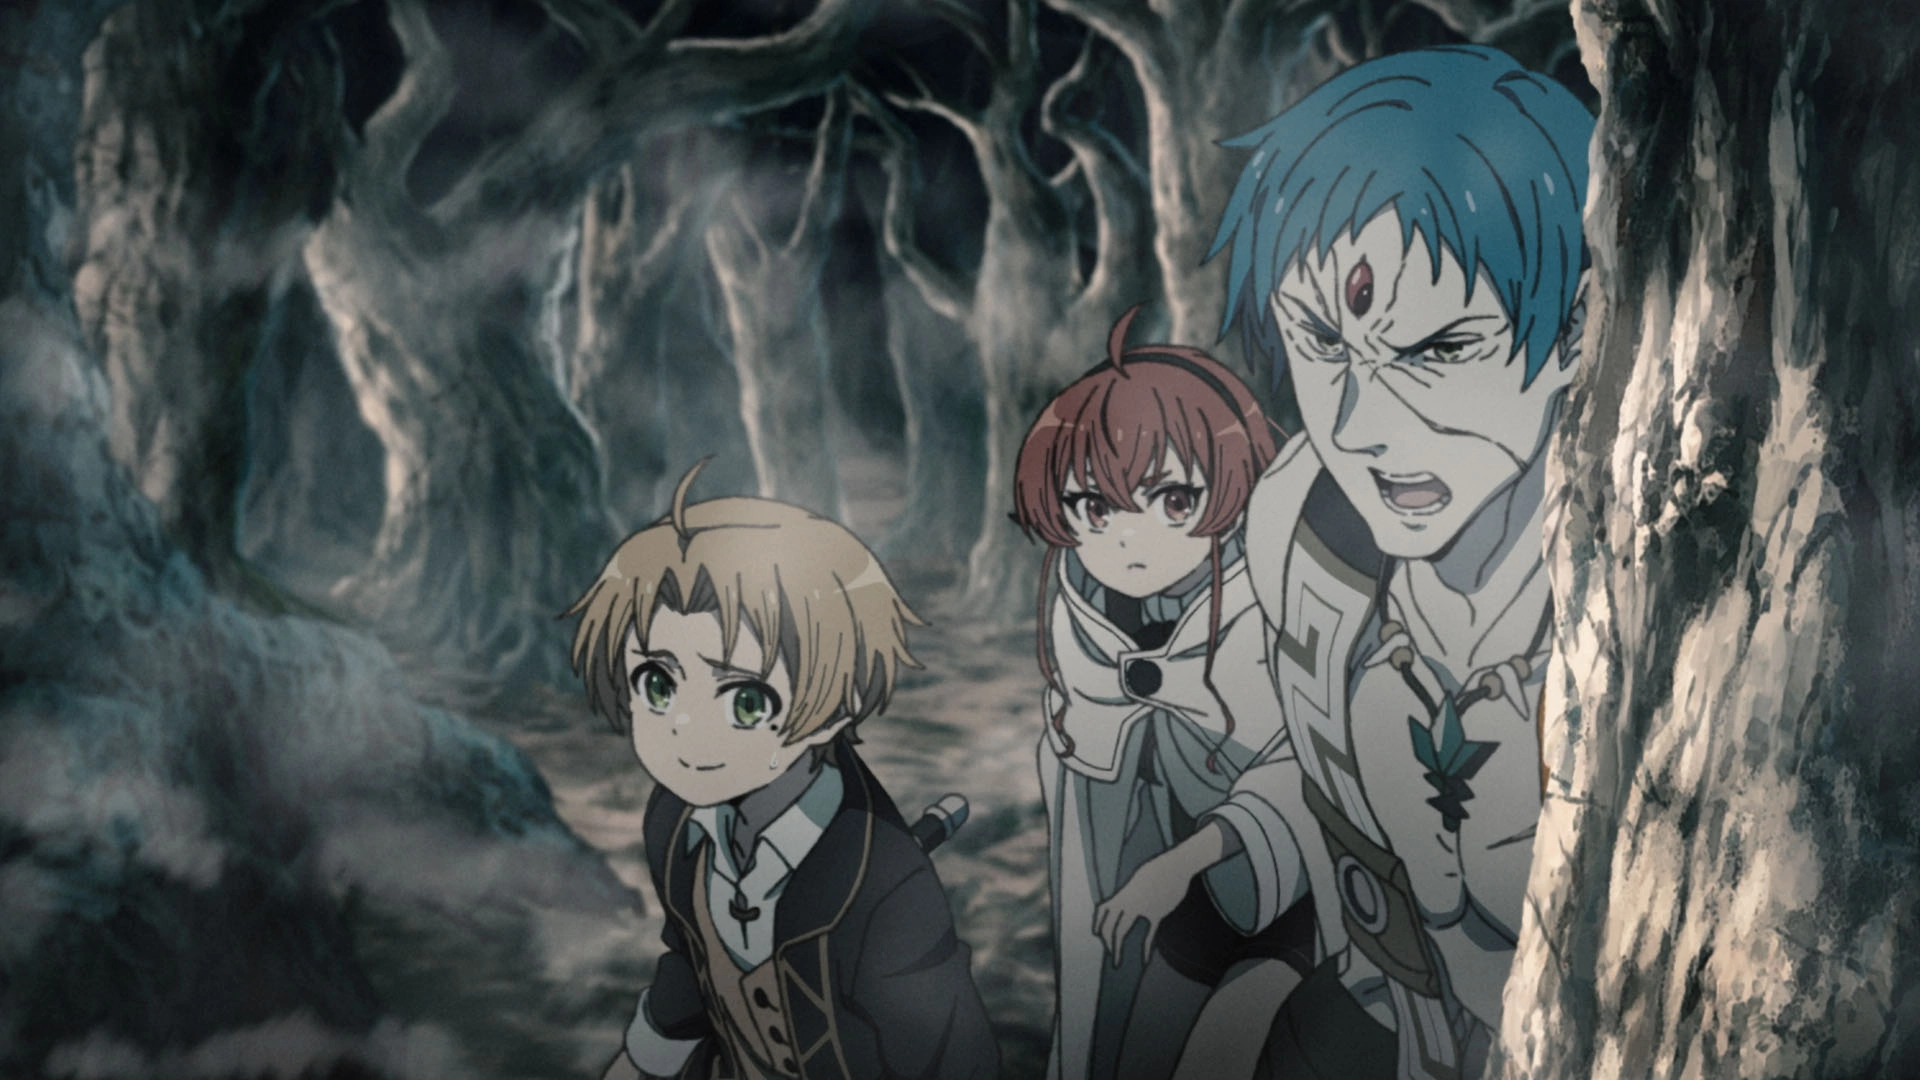 Can't Wait for Sunday? The Inside Scoop on Mushoku Tensei S2 E11 That's Got Everyone Buzzing!